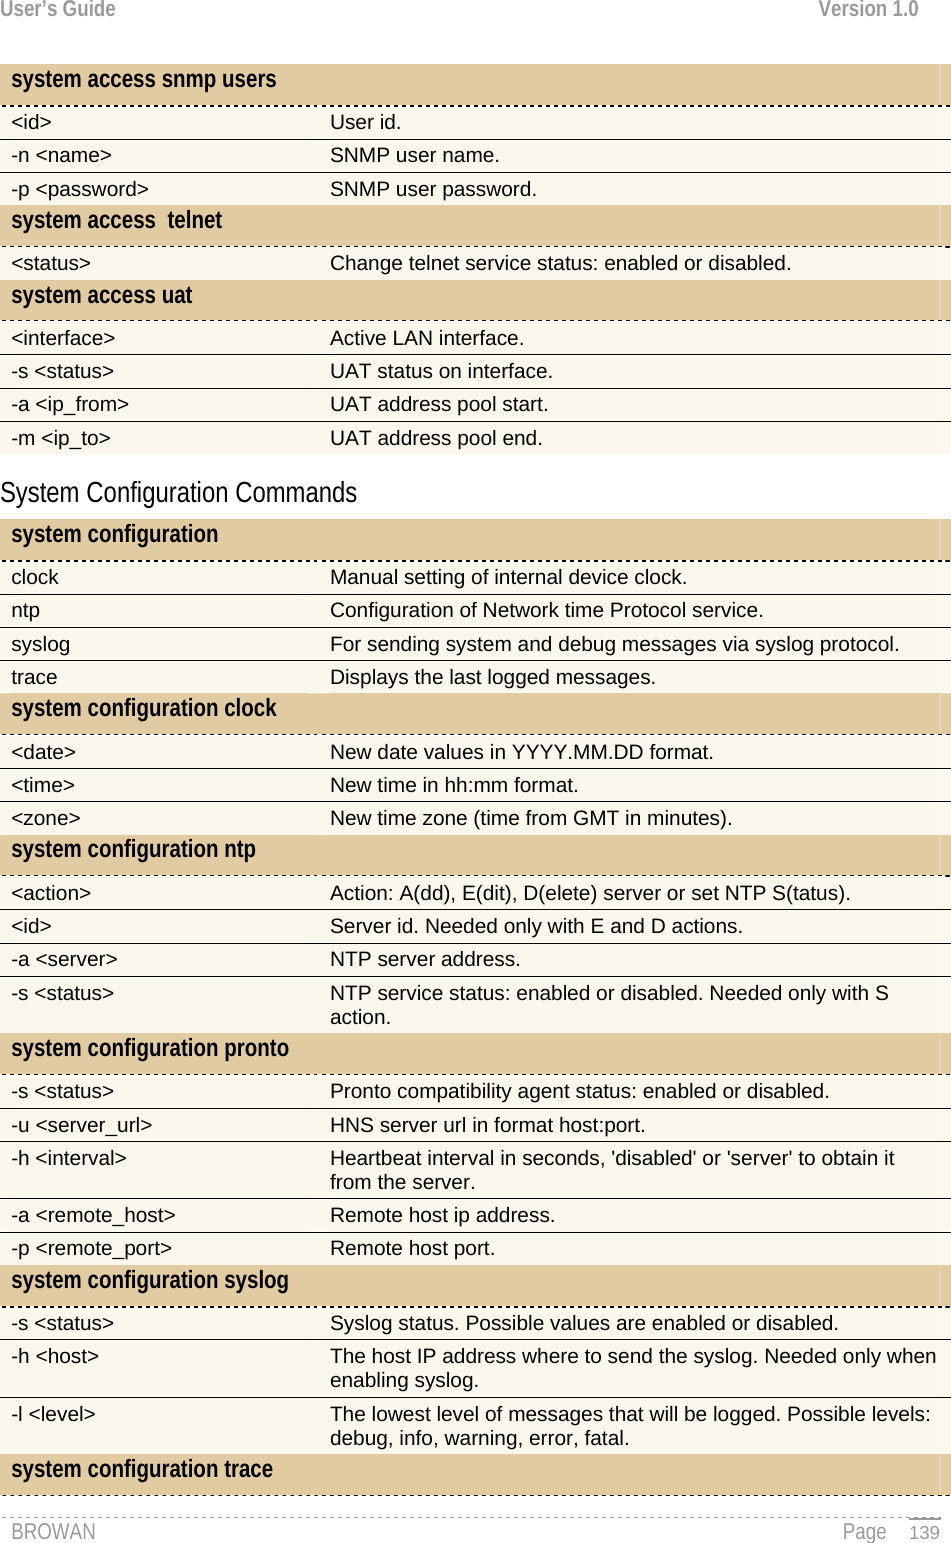 User’s Guide  Version 1.0  BROWAN                                                                                                                                               Page system access snmp users   &lt;id&gt;  User id. -n &lt;name&gt;  SNMP user name. -p &lt;password&gt;  SNMP user password. system access  telnet   &lt;status&gt;  Change telnet service status: enabled or disabled. system access uat   &lt;interface&gt;    Active LAN interface. -s &lt;status&gt;      UAT status on interface. -a &lt;ip_from&gt;  UAT address pool start. -m &lt;ip_to&gt;       UAT address pool end. System Configuration Commands system configuration    clock  Manual setting of internal device clock. ntp  Configuration of Network time Protocol service. syslog  For sending system and debug messages via syslog protocol. trace  Displays the last logged messages. system configuration clock   &lt;date&gt;  New date values in YYYY.MM.DD format. &lt;time&gt;  New time in hh:mm format. &lt;zone&gt;  New time zone (time from GMT in minutes). system configuration ntp   &lt;action&gt;  Action: A(dd), E(dit), D(elete) server or set NTP S(tatus). &lt;id&gt;  Server id. Needed only with E and D actions. -a &lt;server&gt;  NTP server address. NTP service status: enabled or disabled. Needed only with S action. -s &lt;status&gt; system configuration pronto   -s &lt;status&gt;   Pronto compatibility agent status: enabled or disabled. -u &lt;server_url&gt;  HNS server url in format host:port. Heartbeat interval in seconds, &apos;disabled&apos; or &apos;server&apos; to obtain it from the server. -h &lt;interval&gt;     -a &lt;remote_host&gt;  Remote host ip address. -p &lt;remote_port&gt;  Remote host port. system configuration syslog   -s &lt;status&gt;  Syslog status. Possible values are enabled or disabled. The host IP address where to send the syslog. Needed only when enabling syslog. -h &lt;host&gt; The lowest level of messages that will be logged. Possible levels: debug, info, warning, error, fatal. -l &lt;level&gt; system configuration trace     139